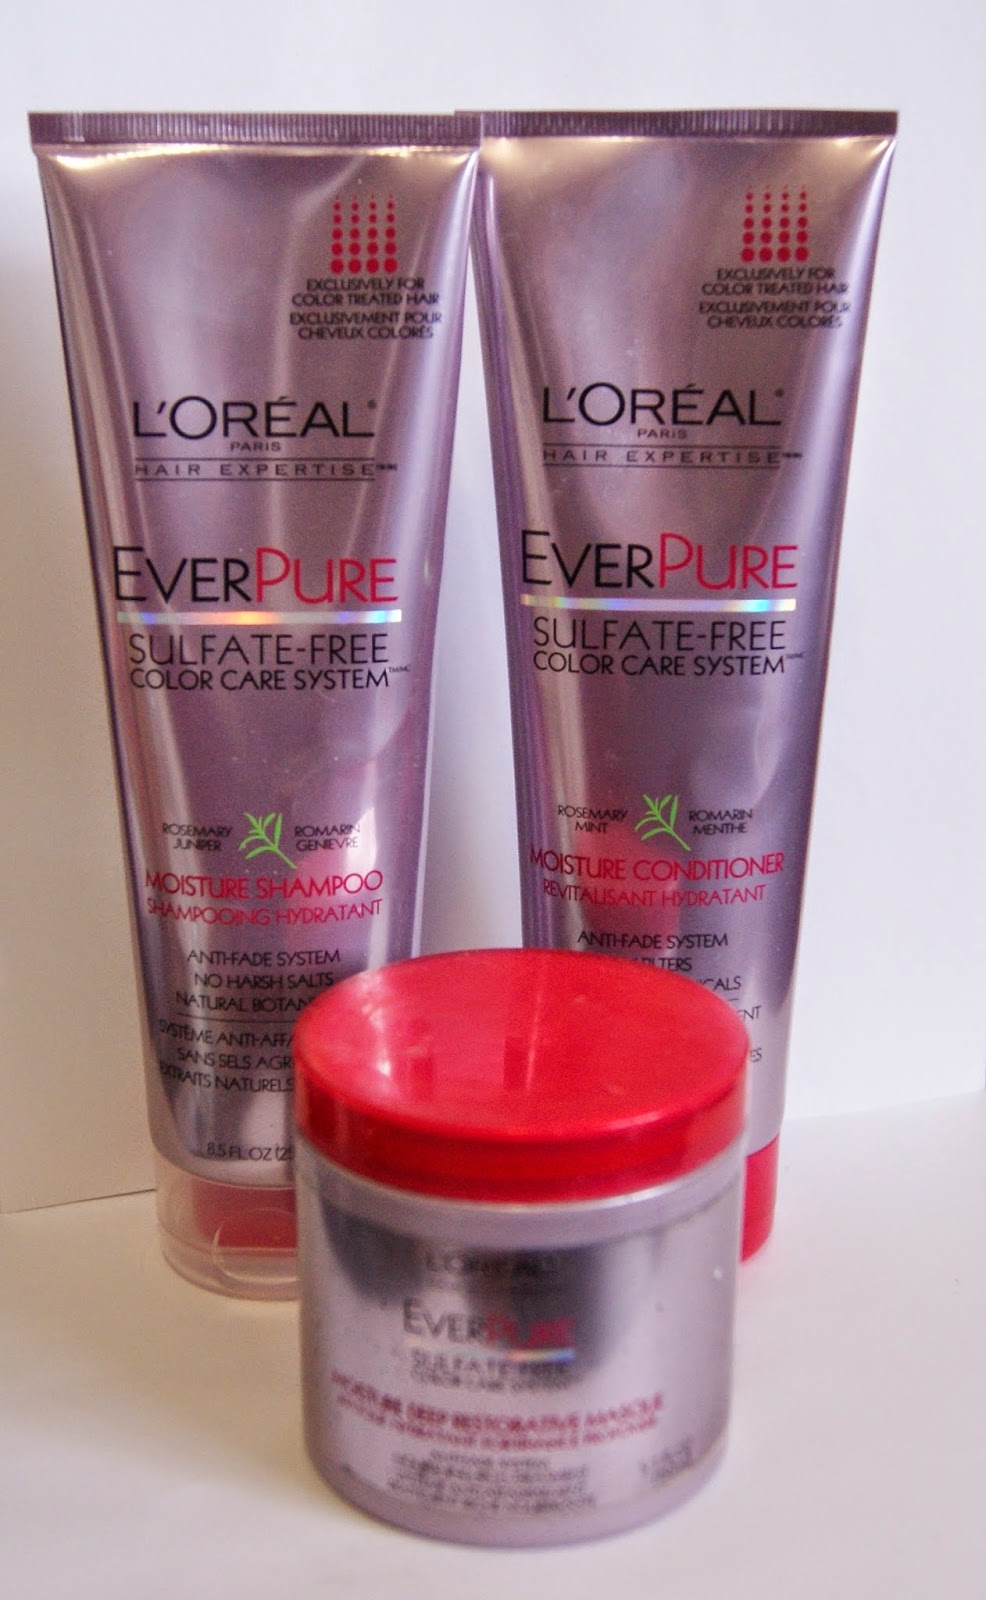 L'Oreal EverPure Sulfate-Free Color Care System: Moisture Shampoo, Conditioner, and Hair Masque Review Beauty Haircare, Melanie.Ps Toronto Blogger The Purple Scarf